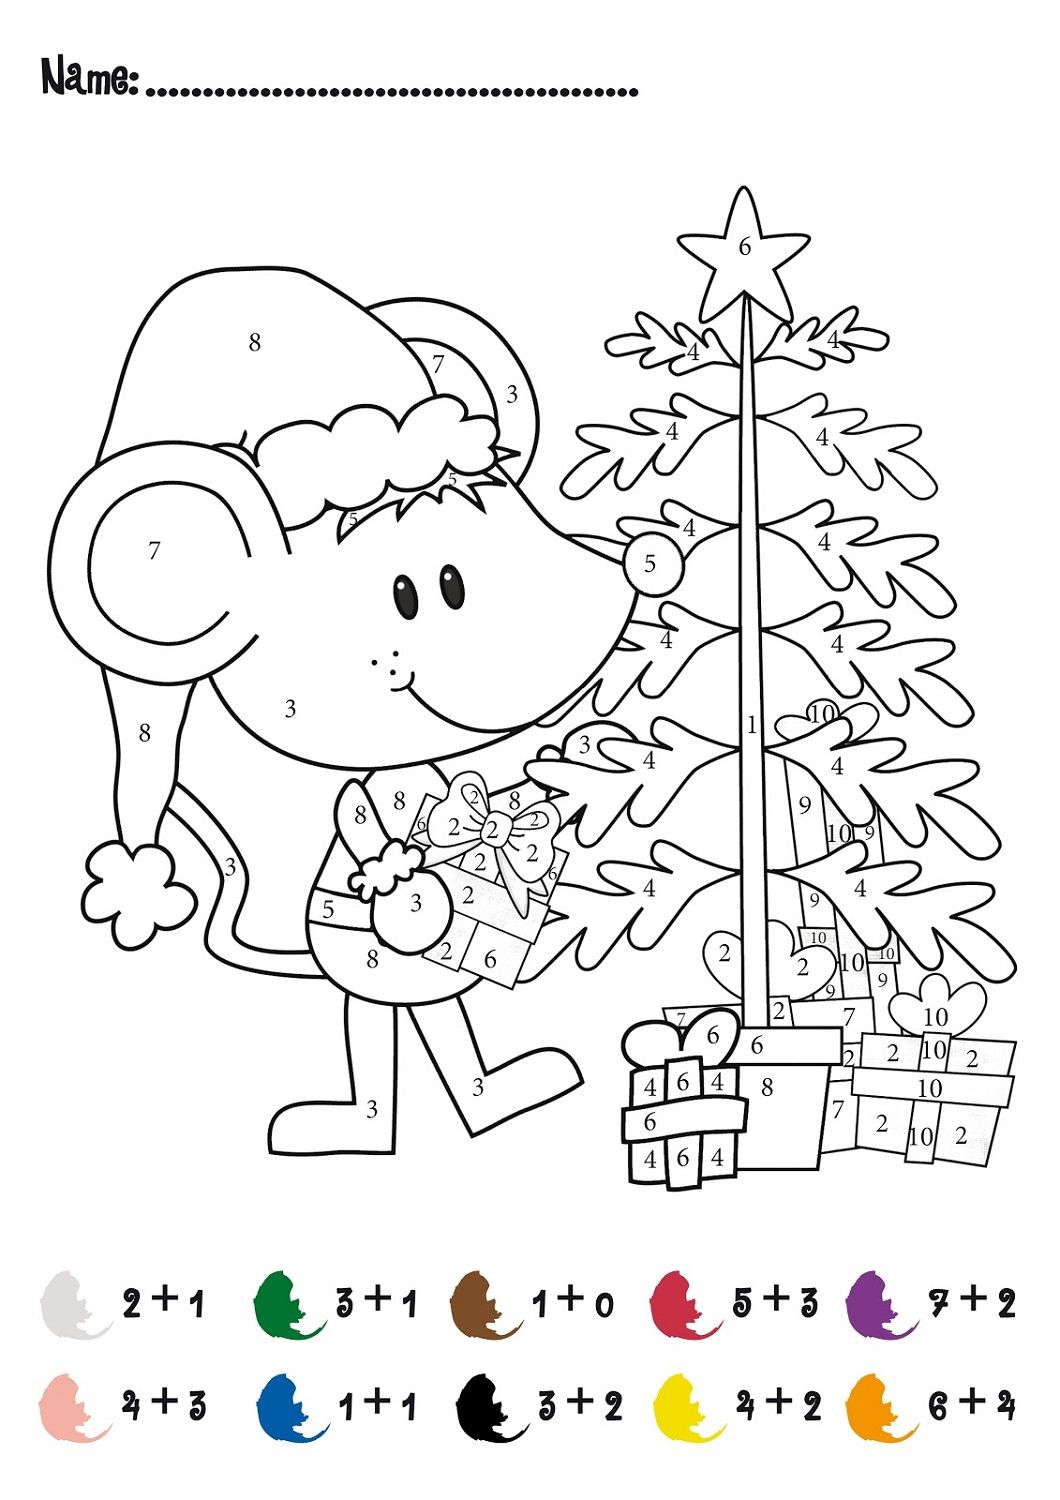 Coloring Pages : Multiplication Coloring Worksheets Colornumber - Free Printable Multiplication Color By Number